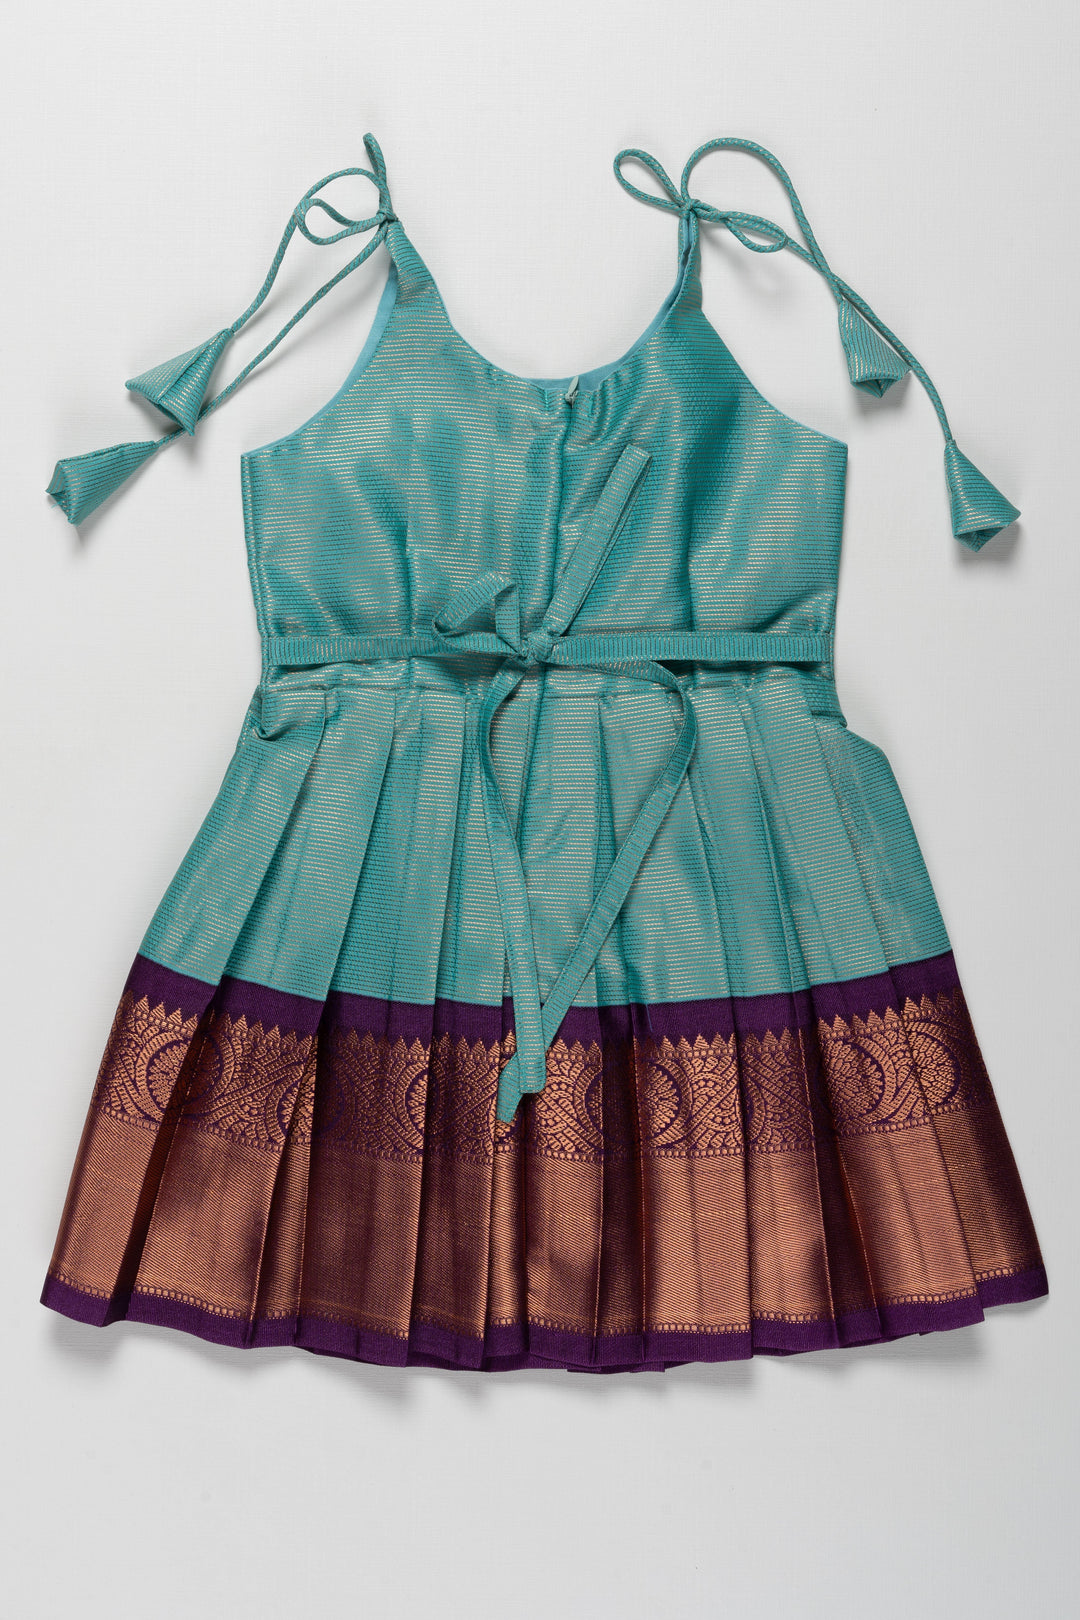 The Nesavu Tie-up Frock Aqua Silk Knot-Tie Frock for Choulam and Choroonu: Exquisite Craftsmanship with Elegant Contrasts Nesavu Stylish Aqua and Brown Silk Dress for Kids | Adjustable KnotTie Frock for Girls | The Nesavu